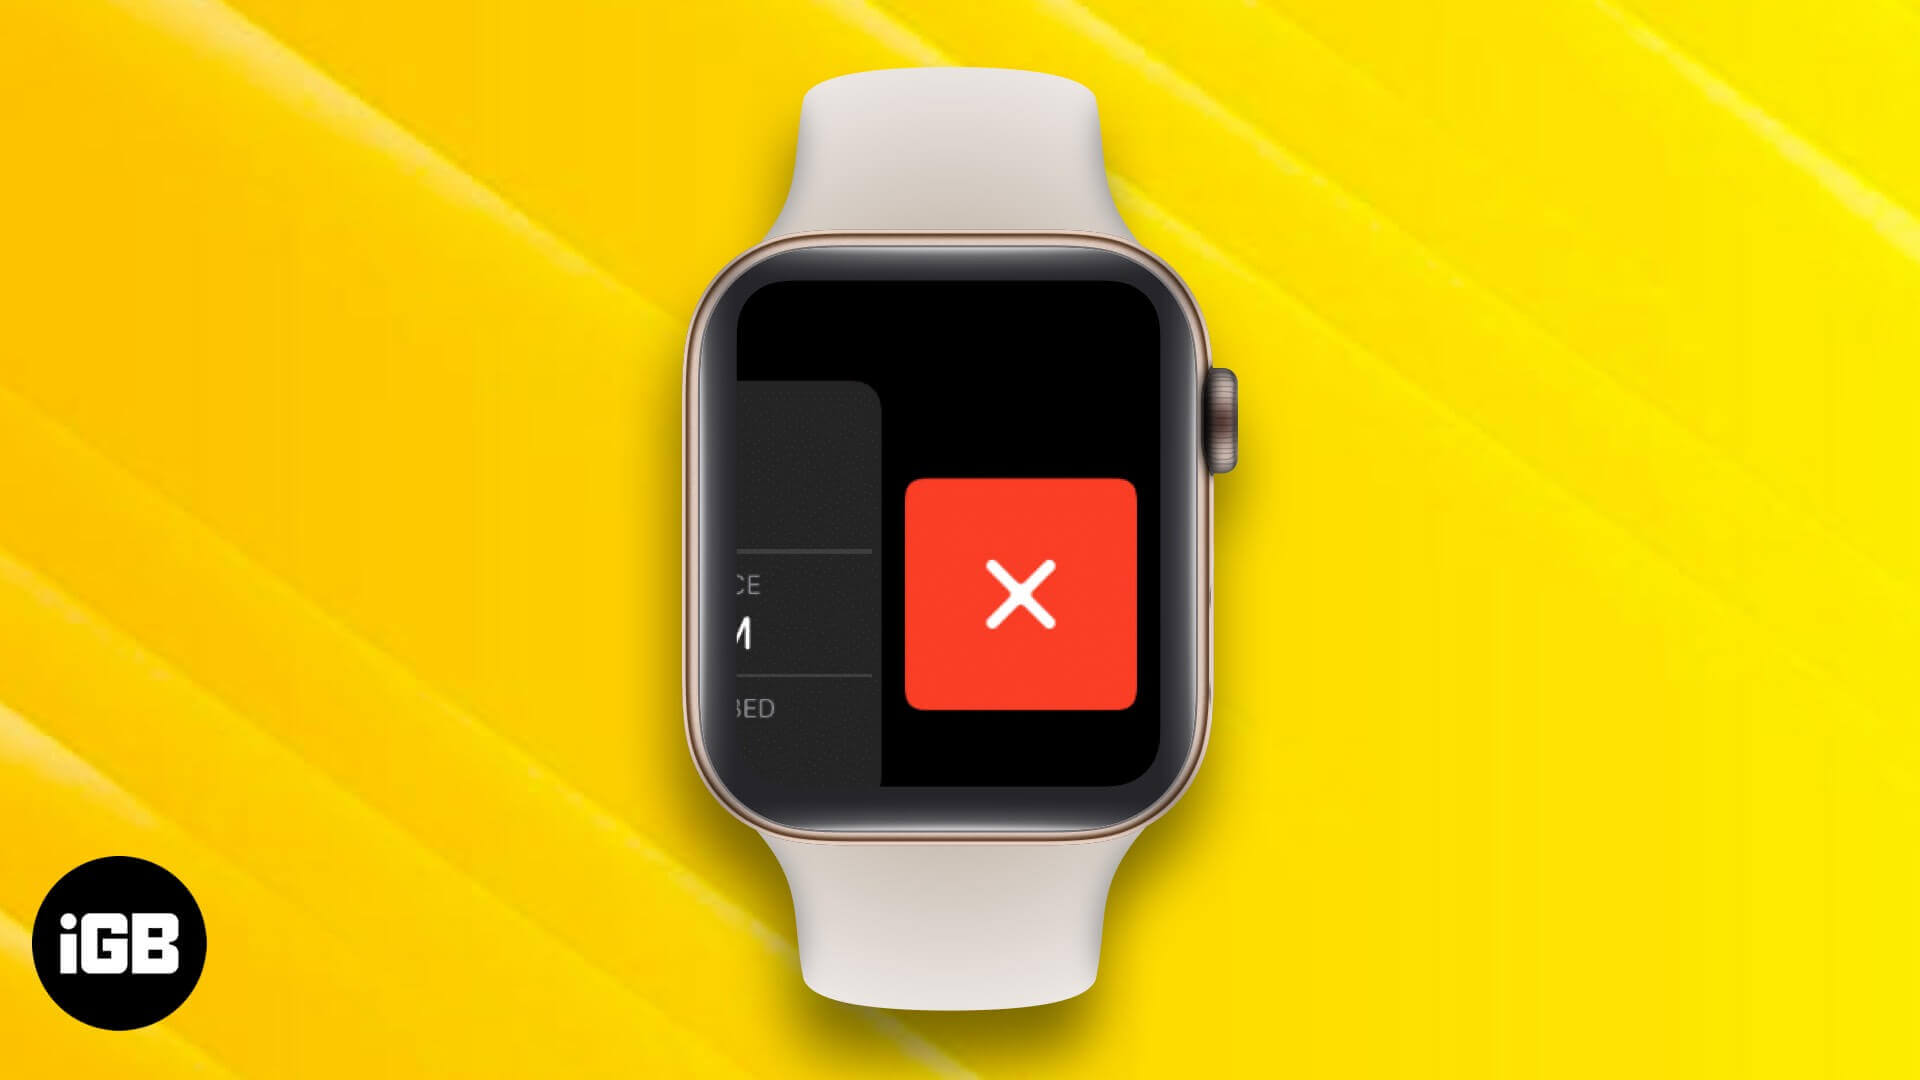 How to close apps on an apple watch